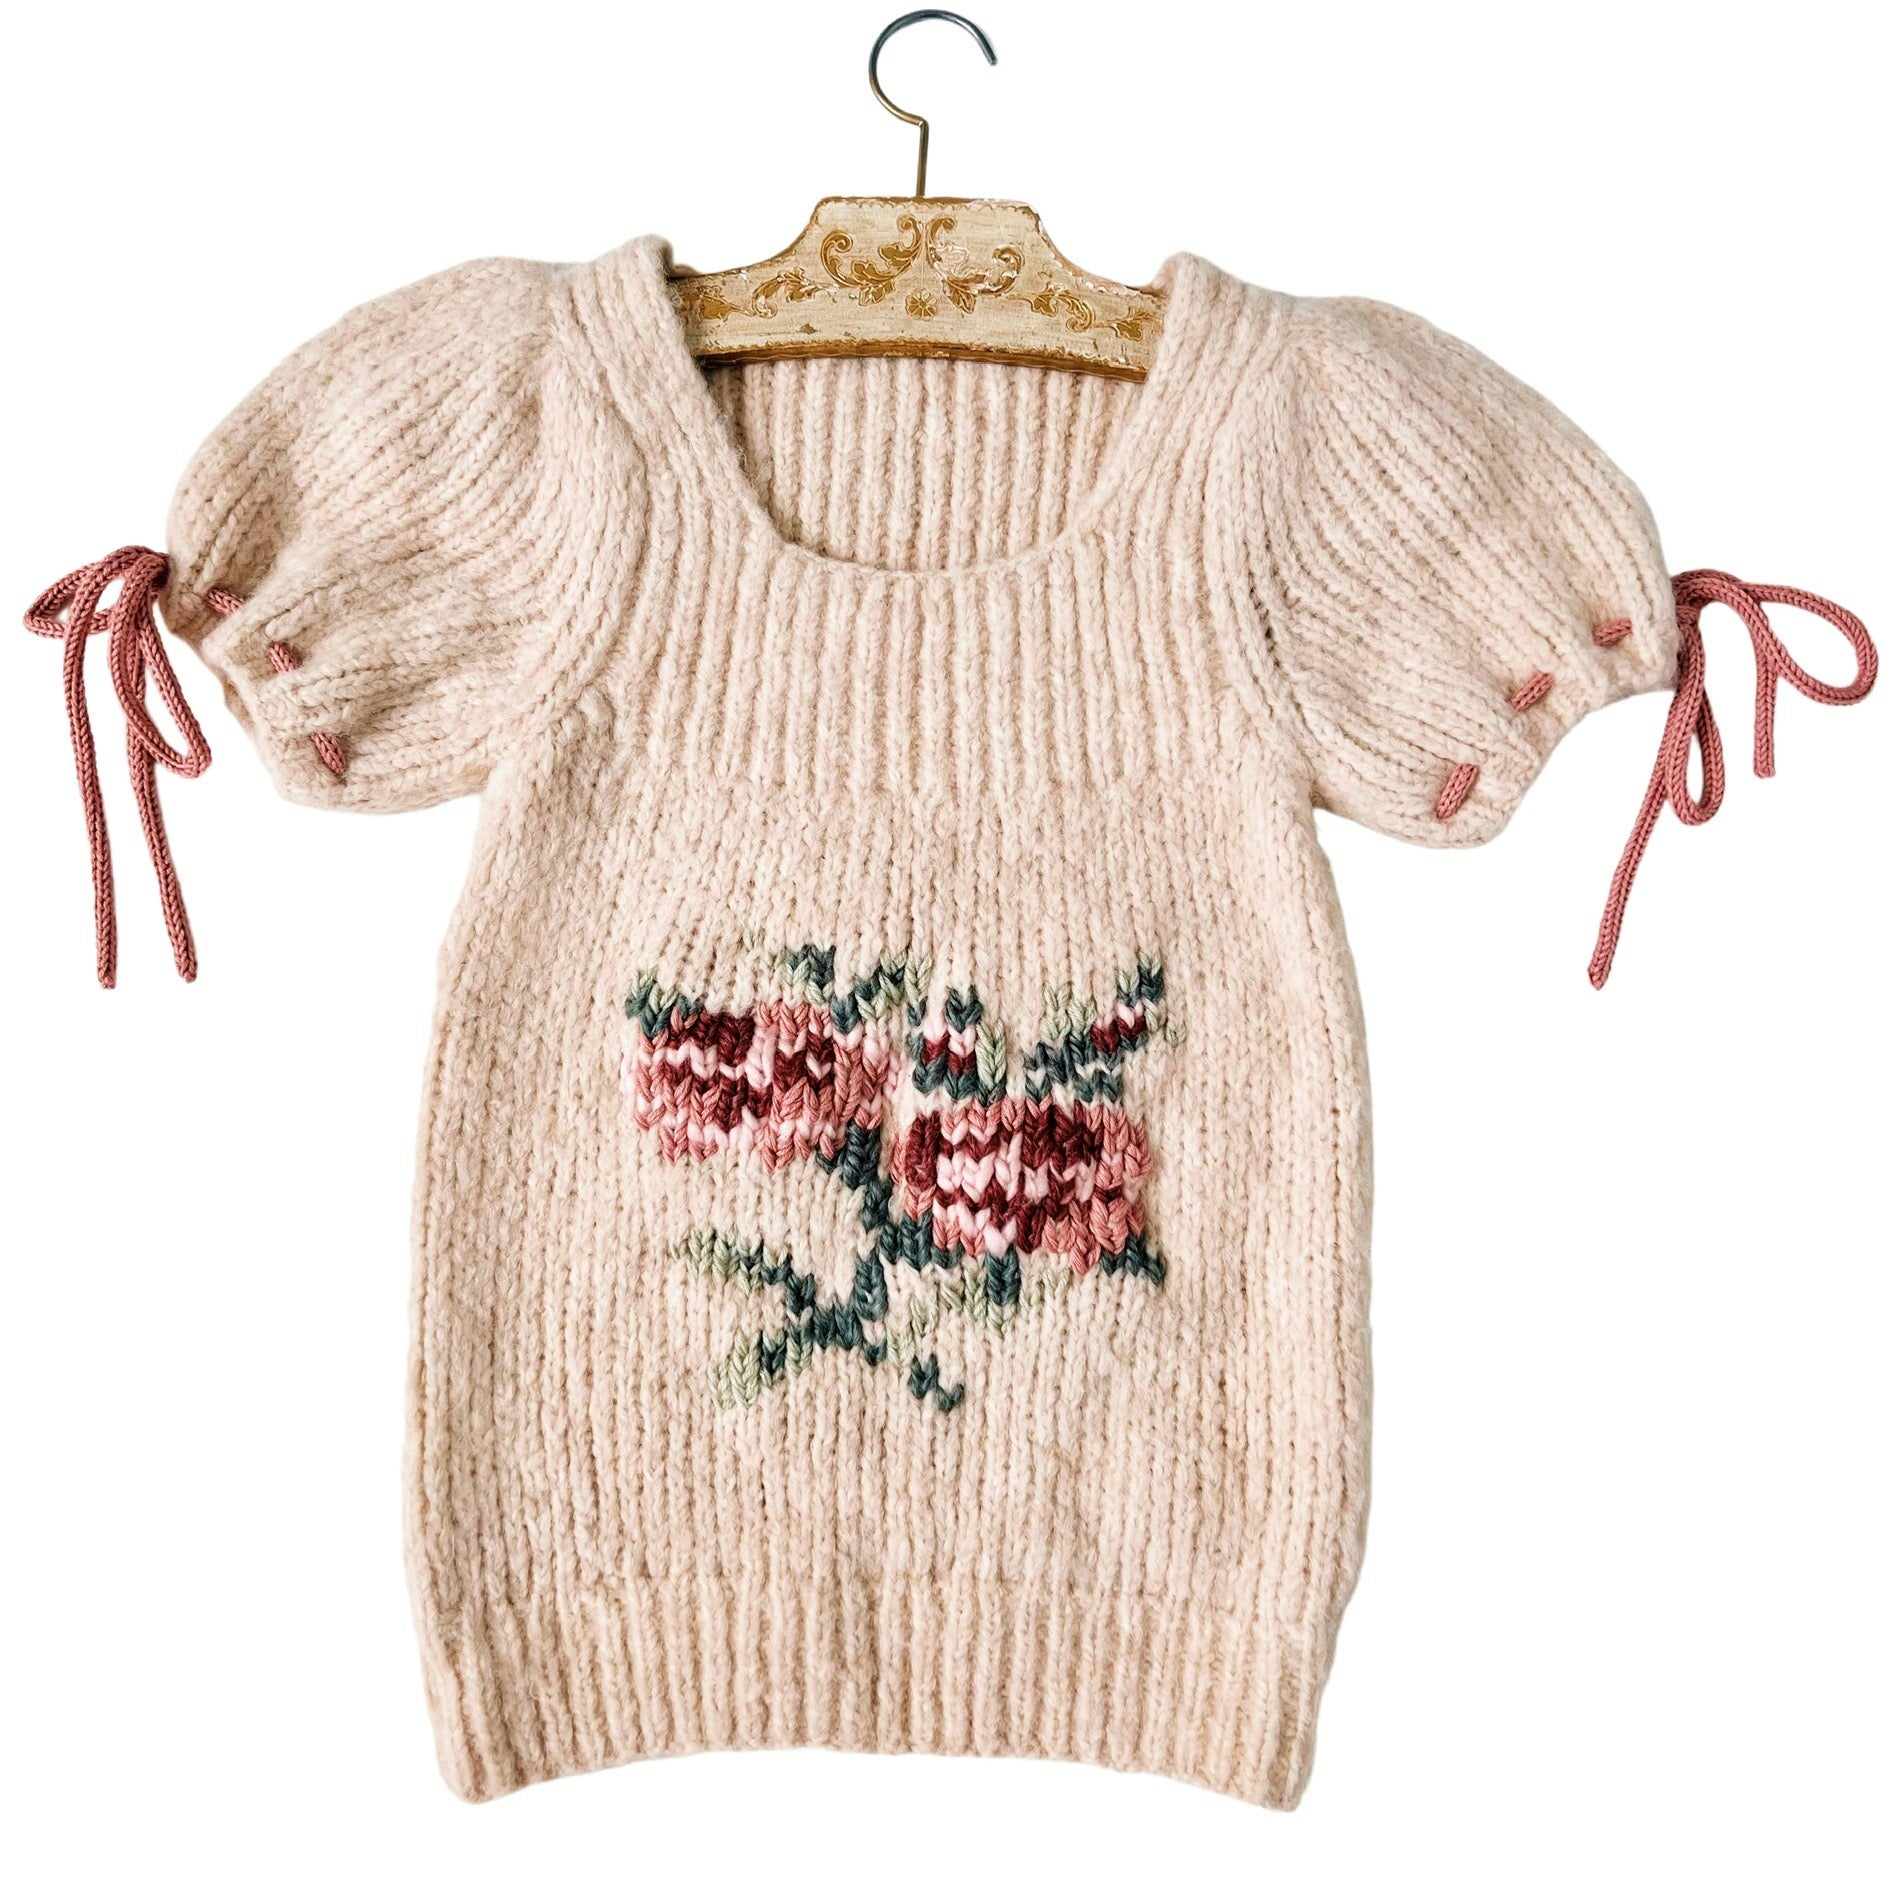 Hand Stitched Floral Sweater Top (XS/S)